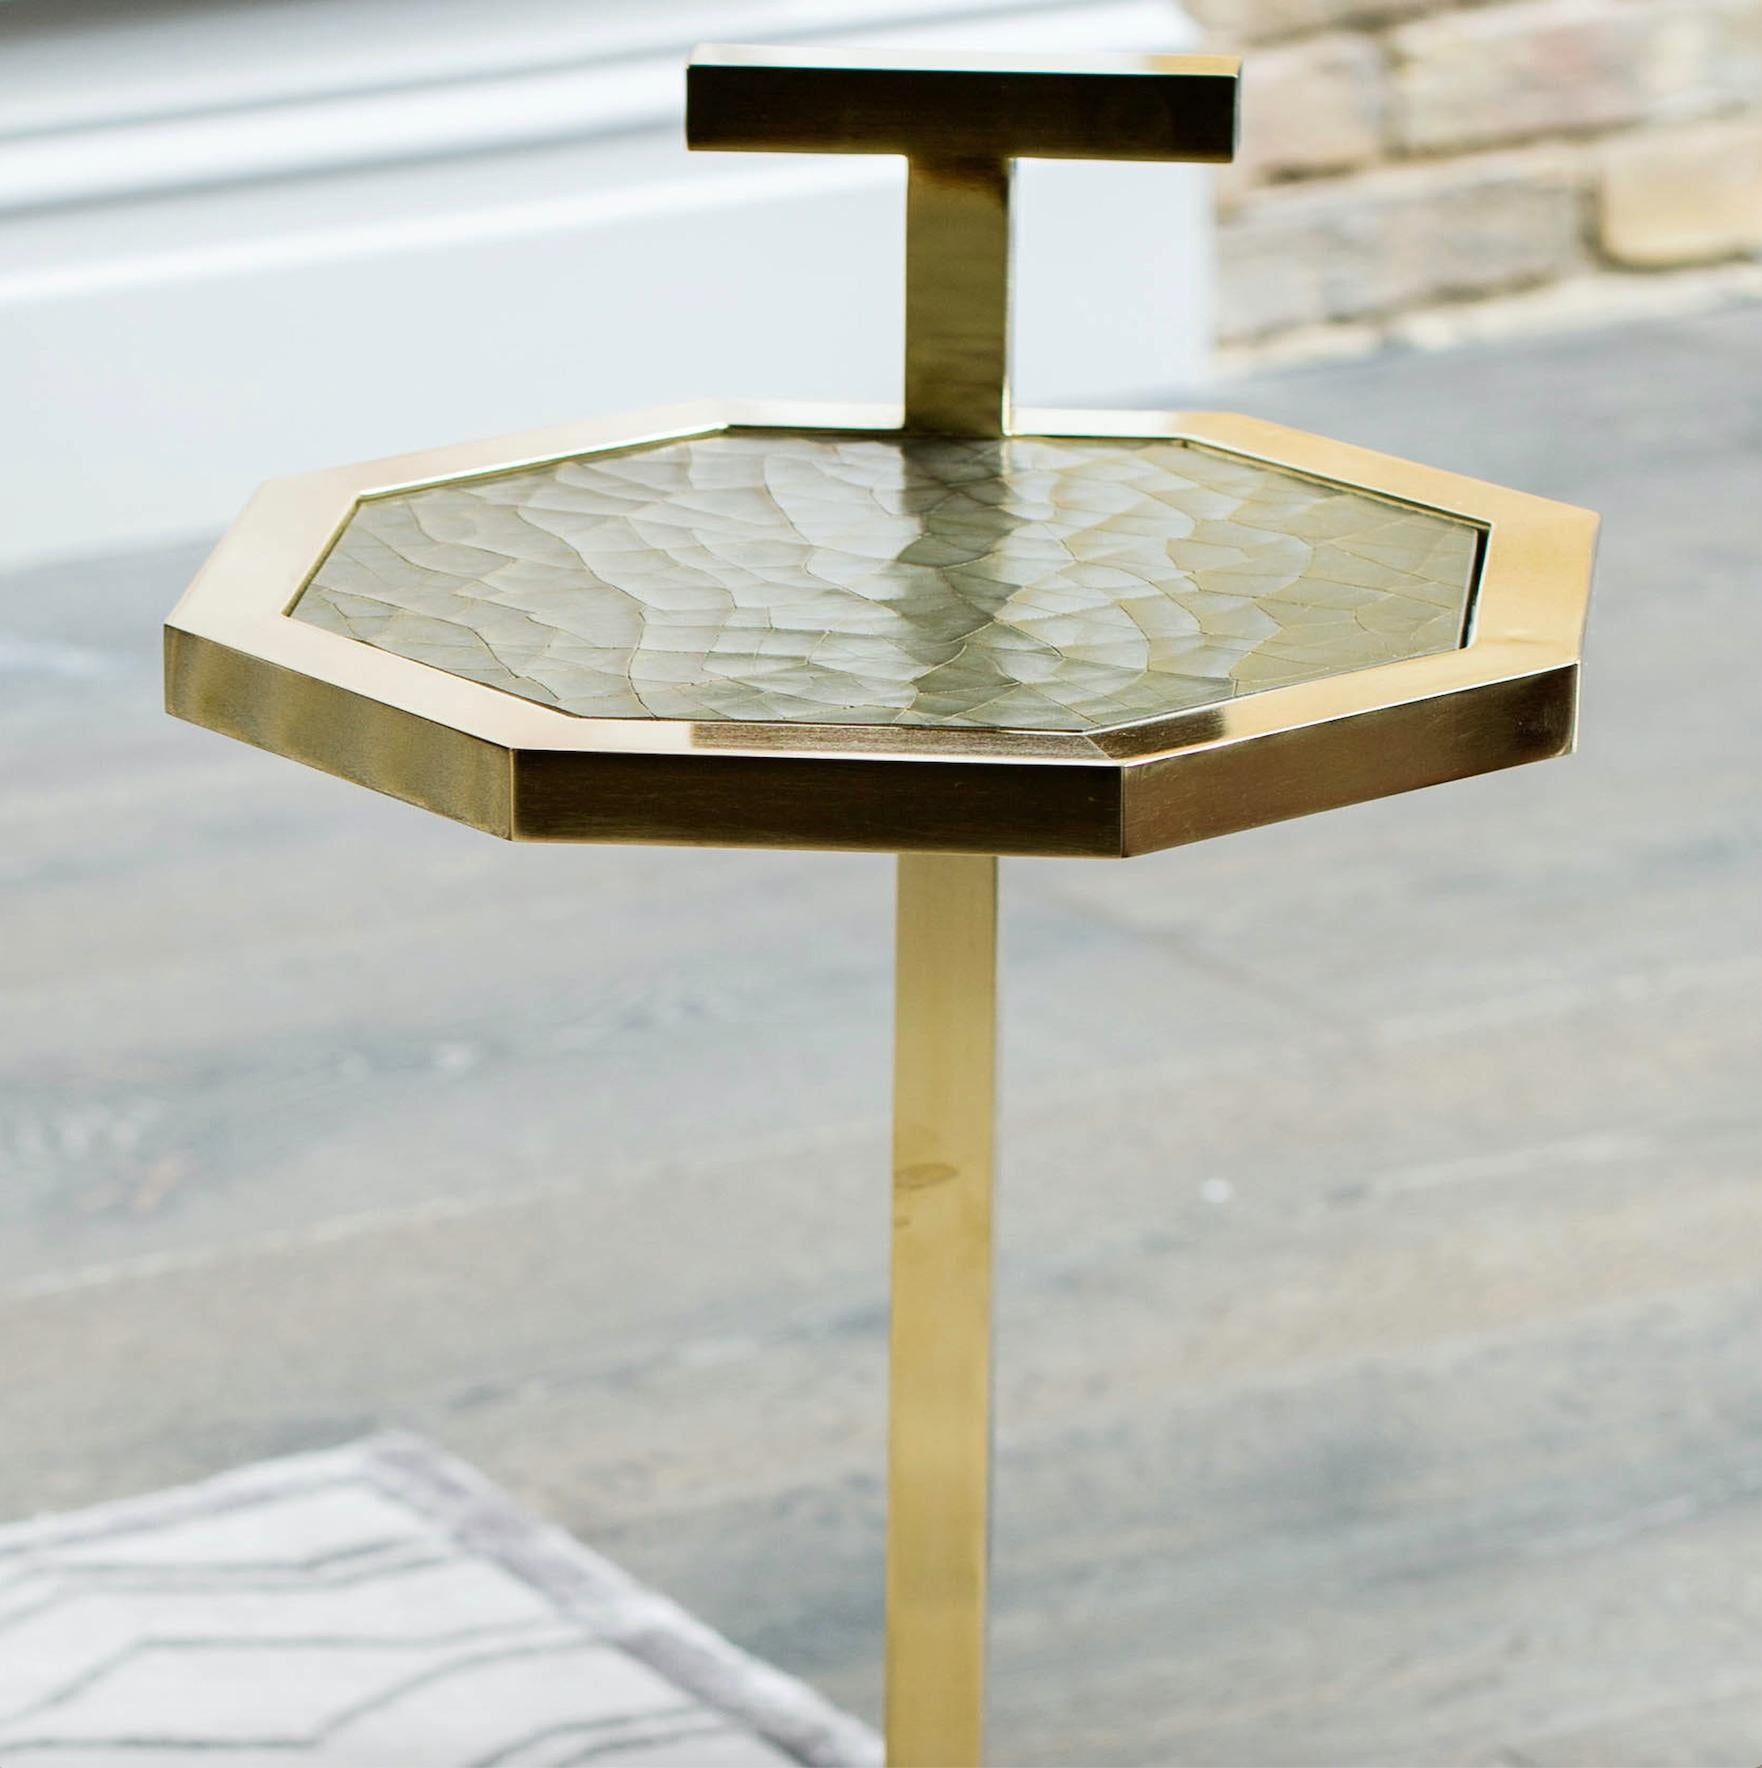 Plated Gibson Martini Table in Brass Tinted Finish and Cracked Gesso Surface